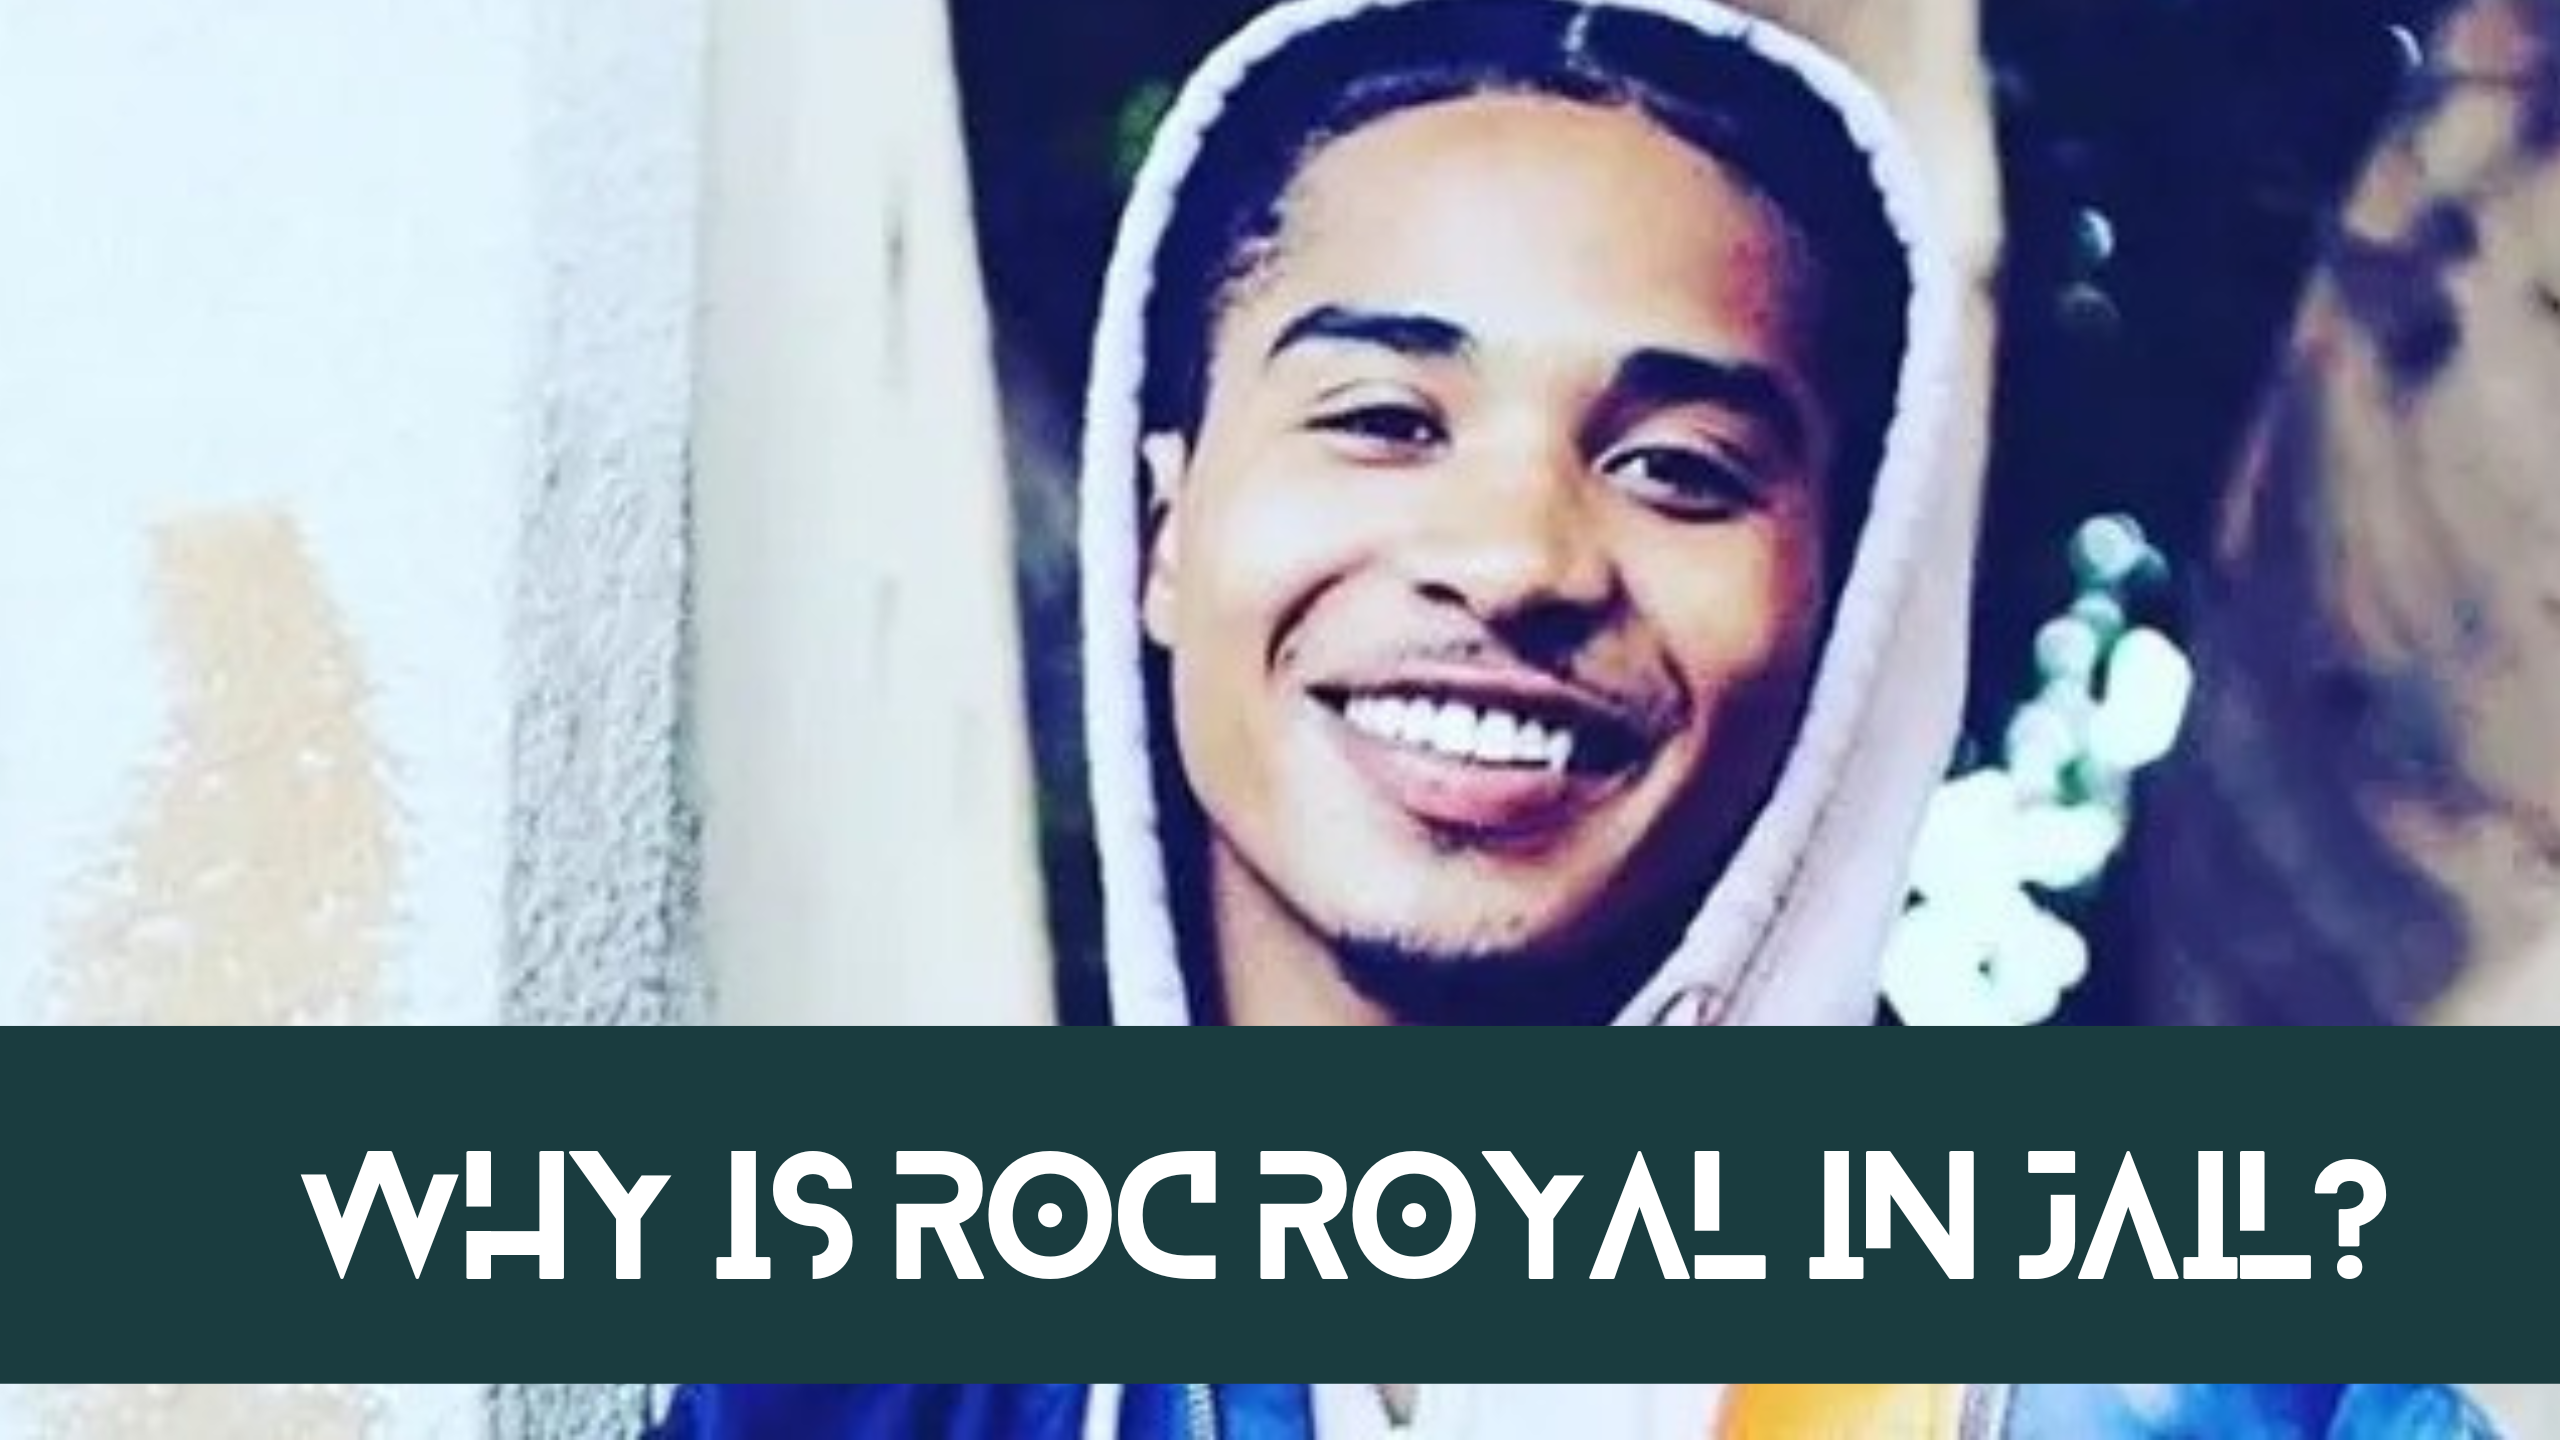 What Happened to Roc Royal?